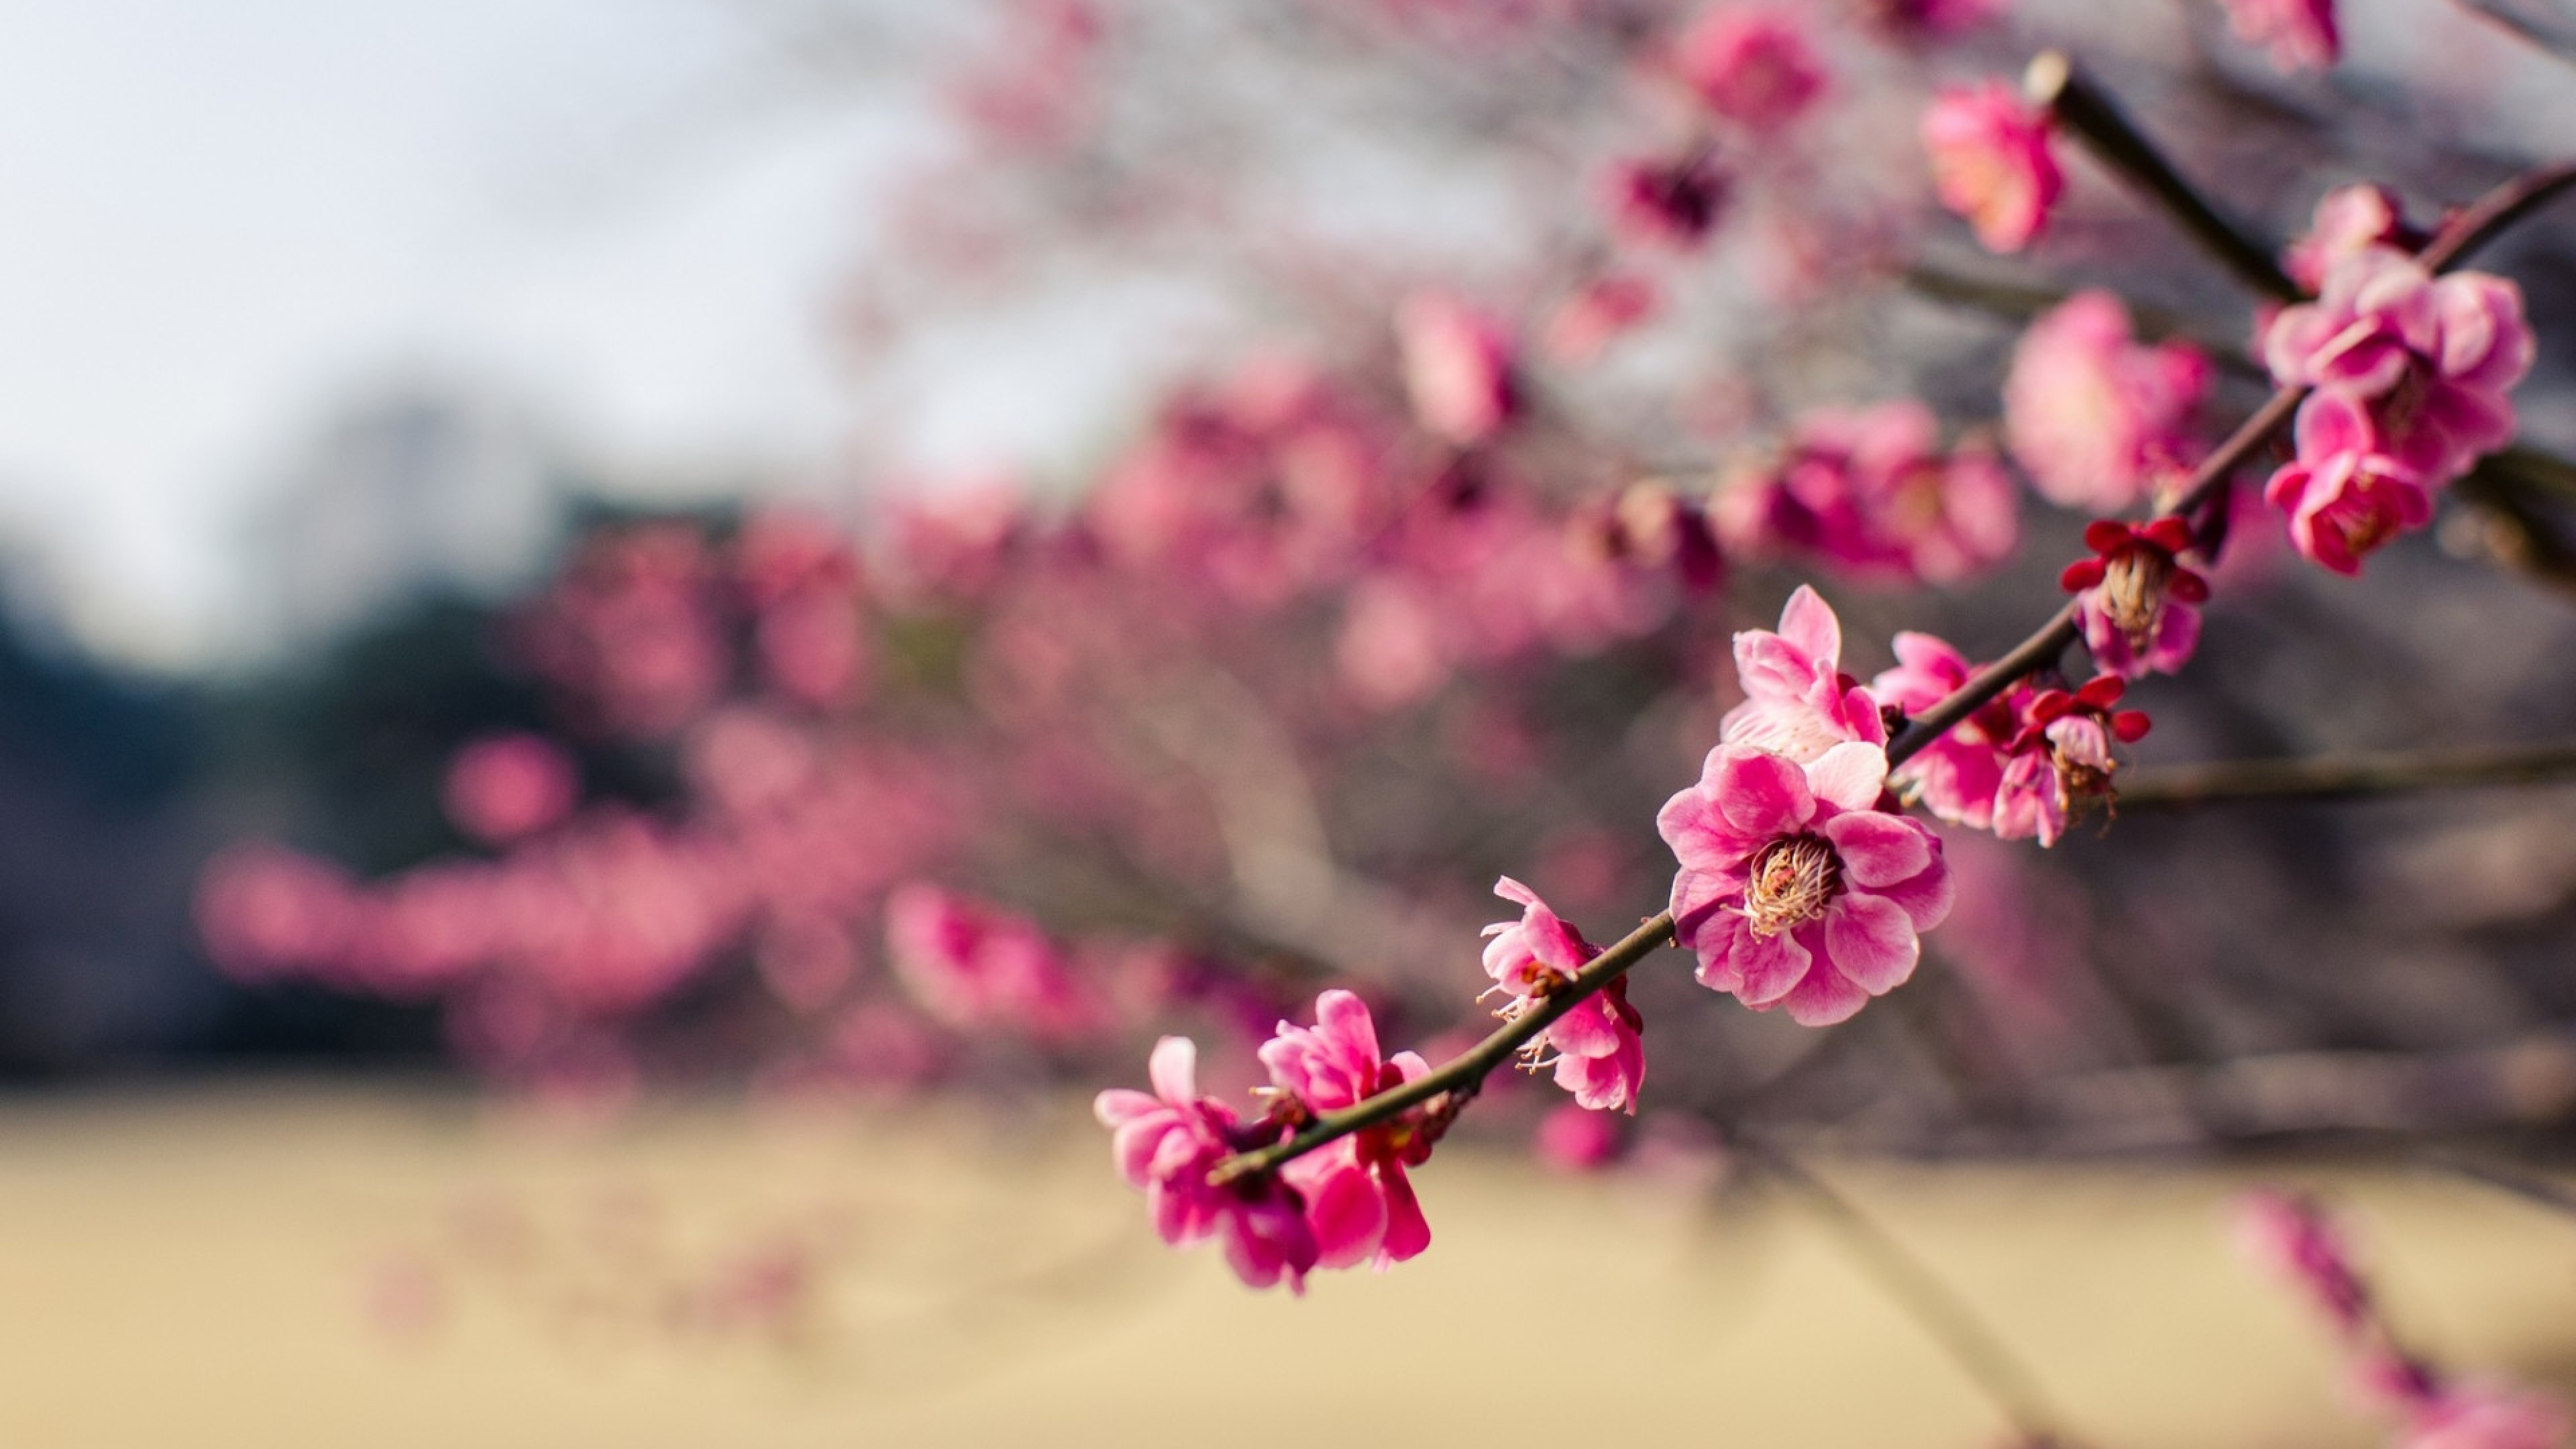 Download 3840x2160 Plum Blossom, Branches, Blurry, Japan, Pink Flowers Wallpapers for UHD TV